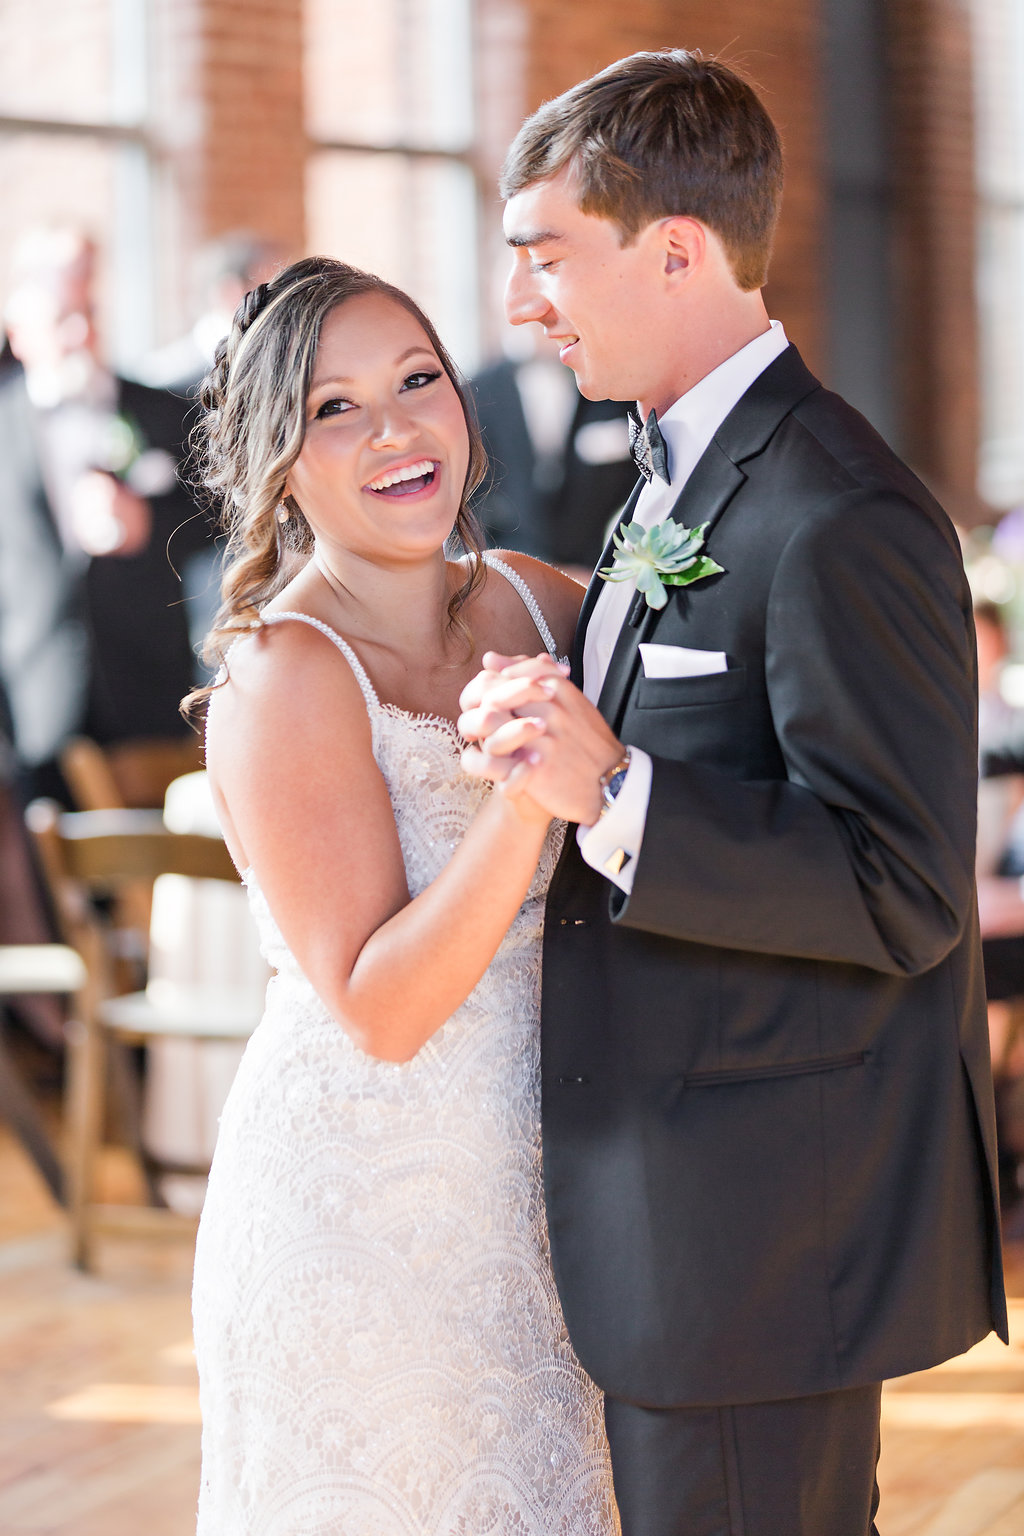  Their first dance was to Tom Petty's "Wildflowers". A unique and perfect song for their first dance. 